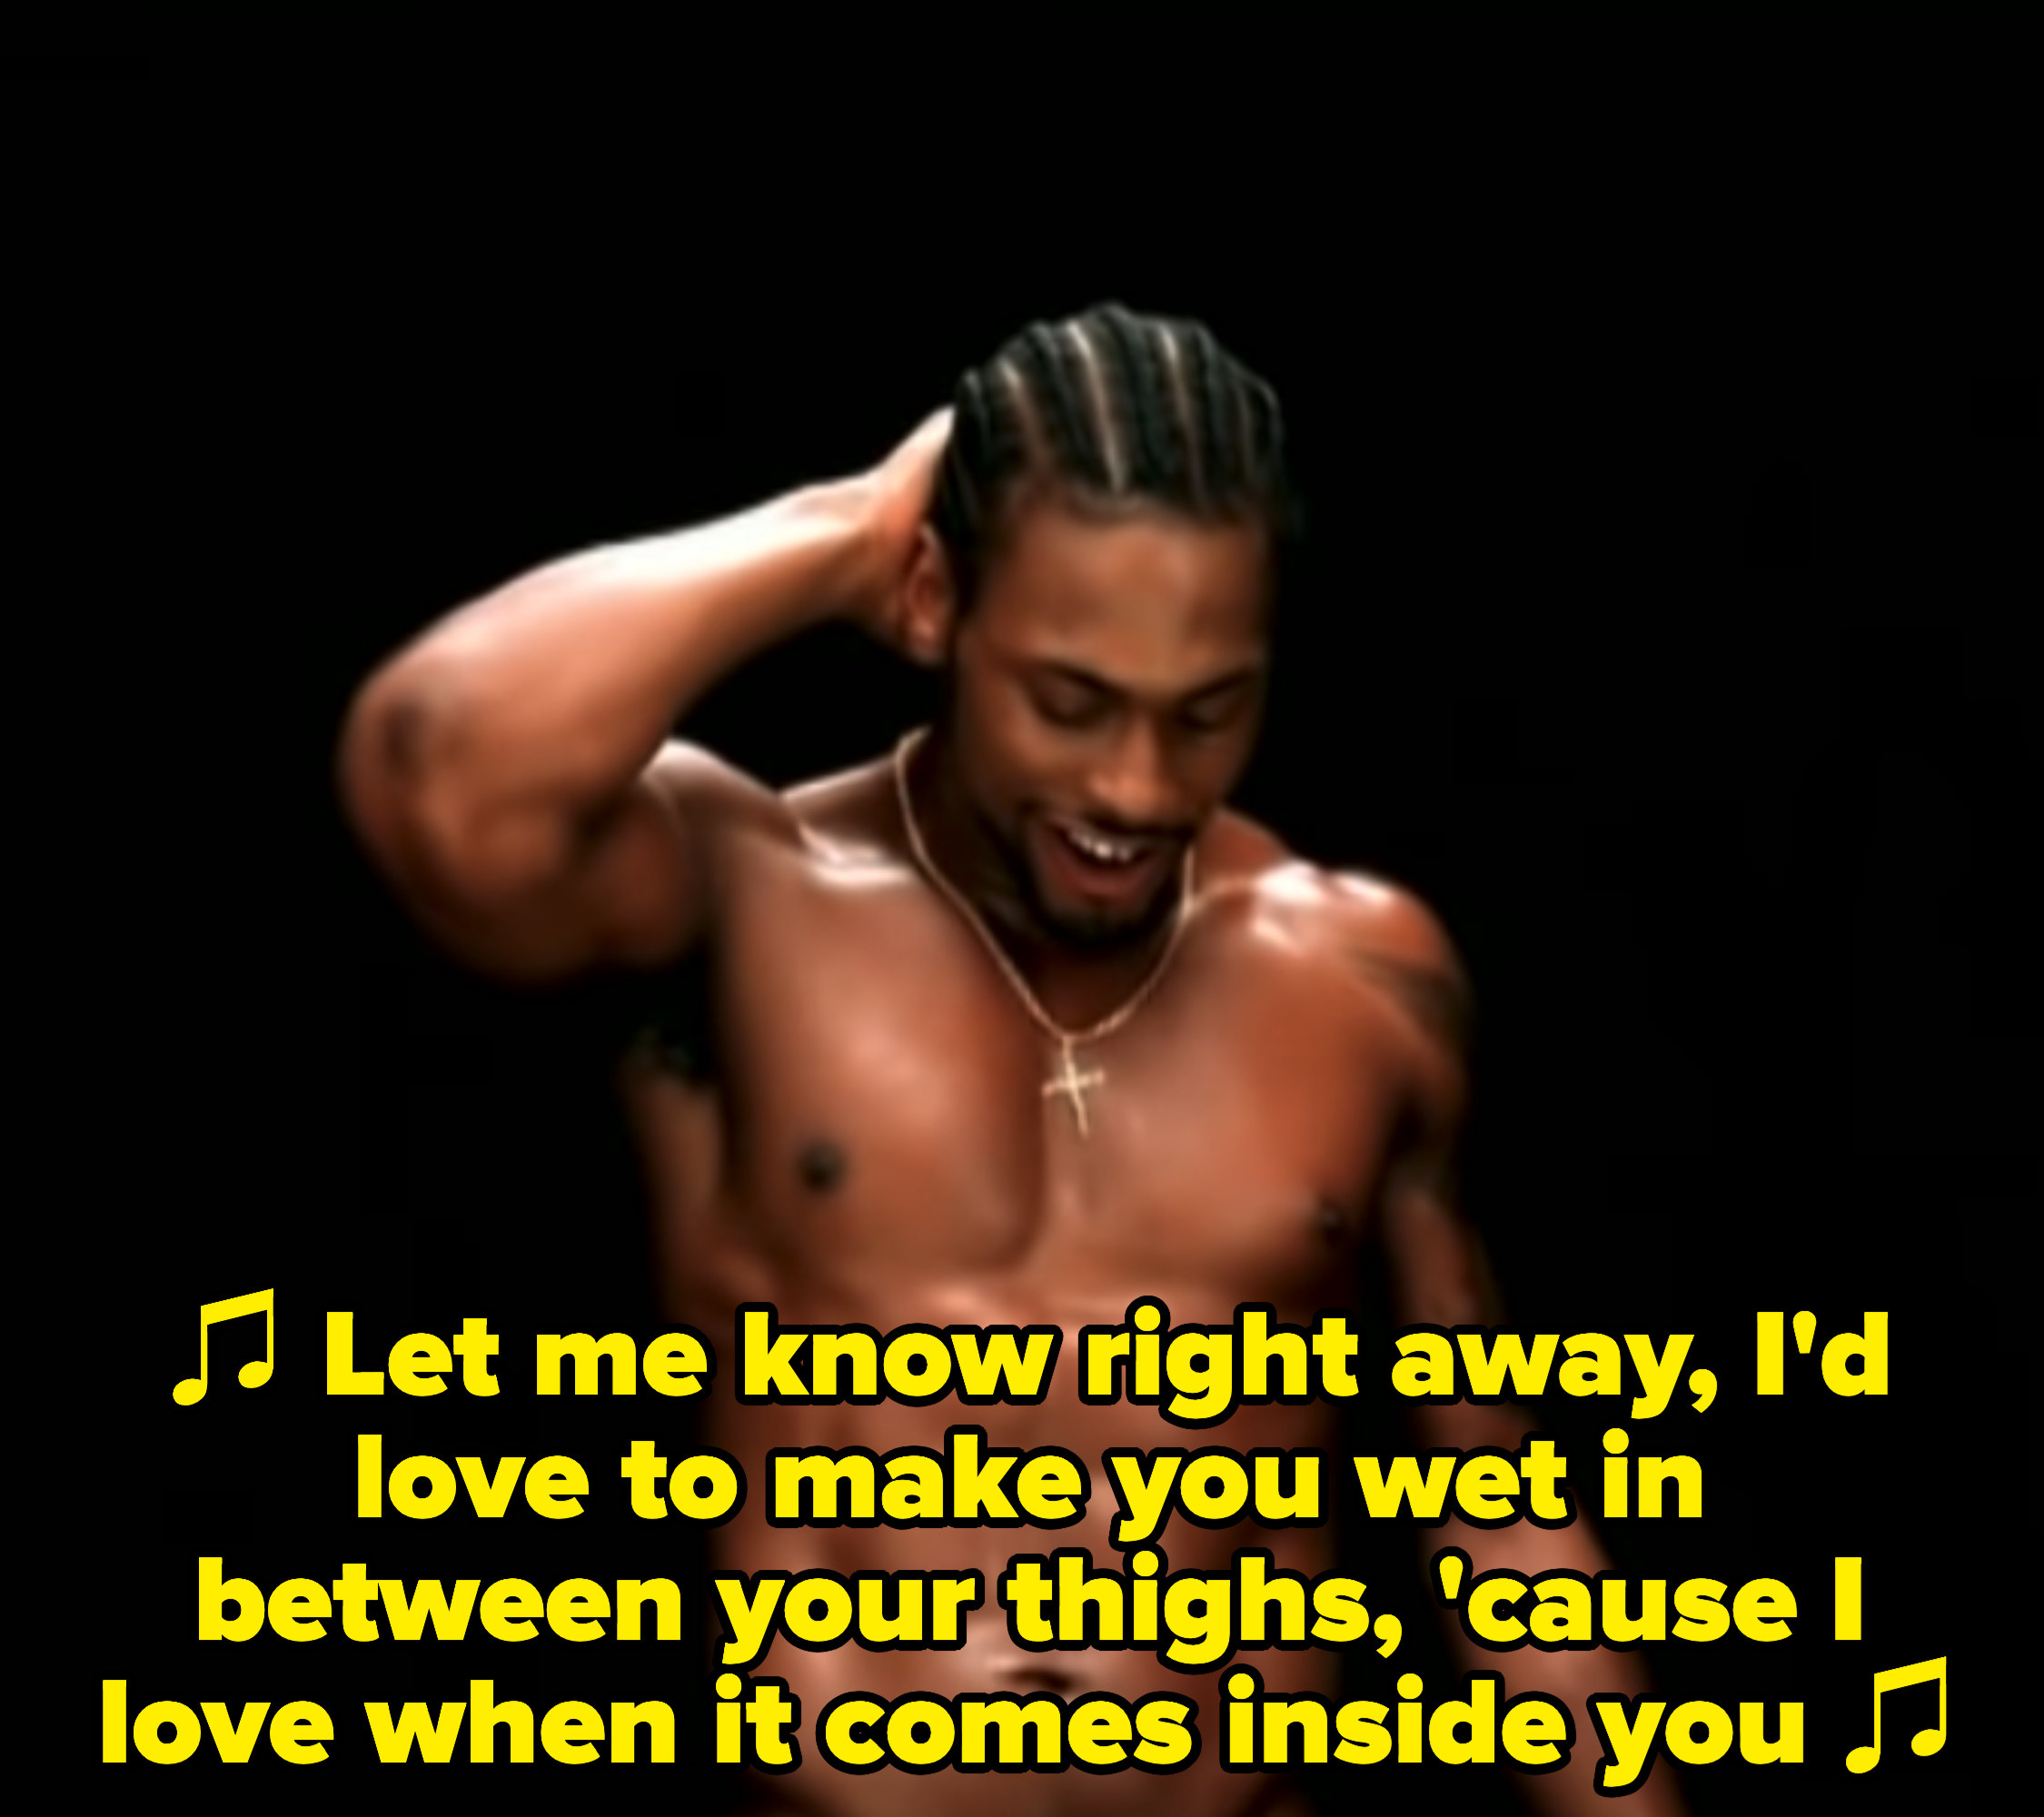 D&#x27;Angelo singing: &quot;Let me know right away, I&#x27;d love to make you wet in between your thighs, &#x27;cause I love when it comes inside you&quot;